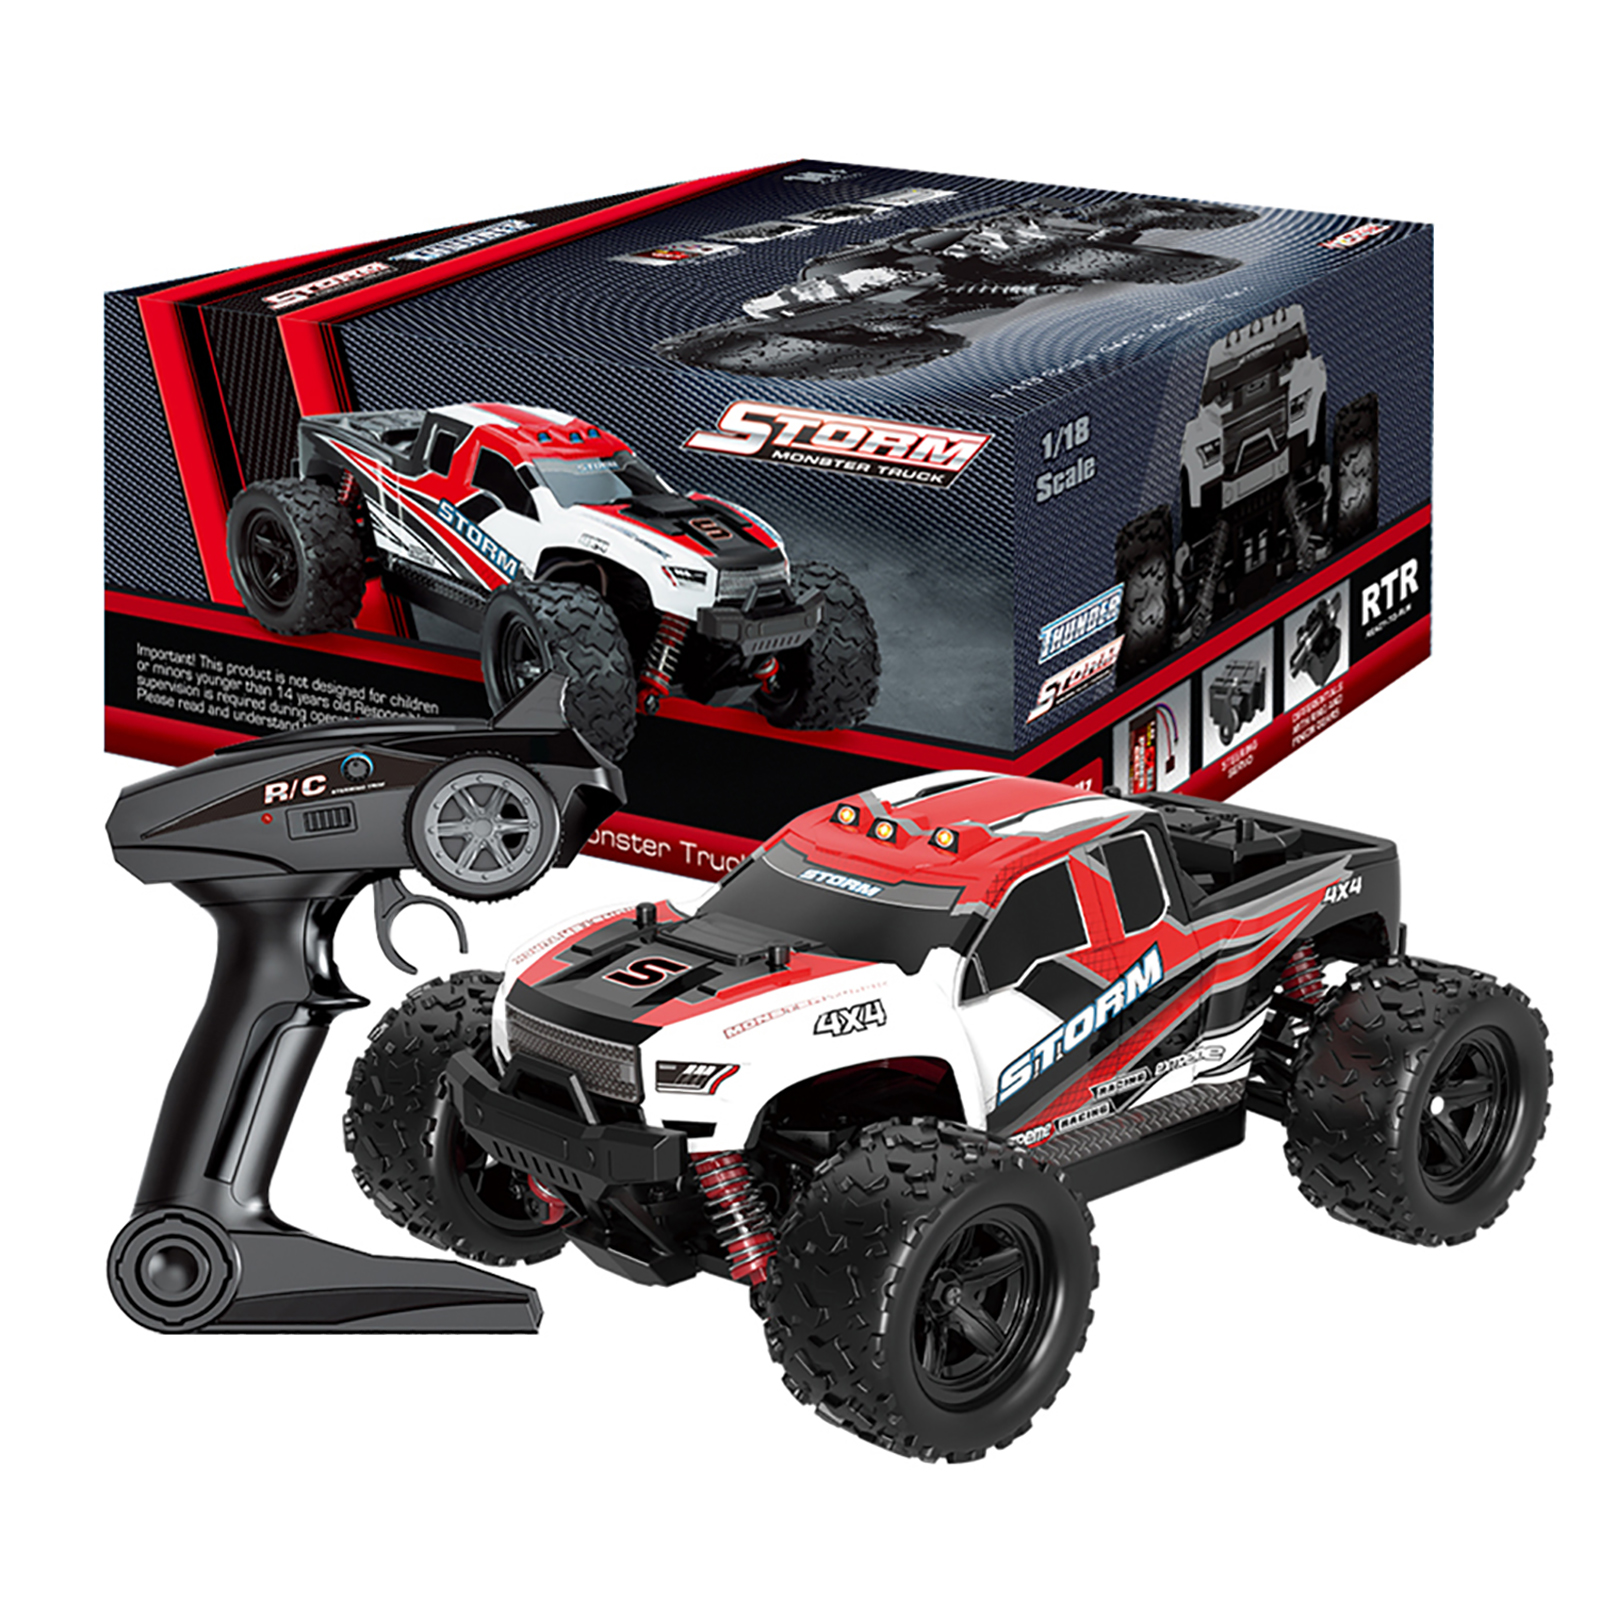 18301/18302 1/18 Full Scale Remote Control Car 2.4GHz Racing Car High-speed 45Km/h Off-road Vehicle Toys